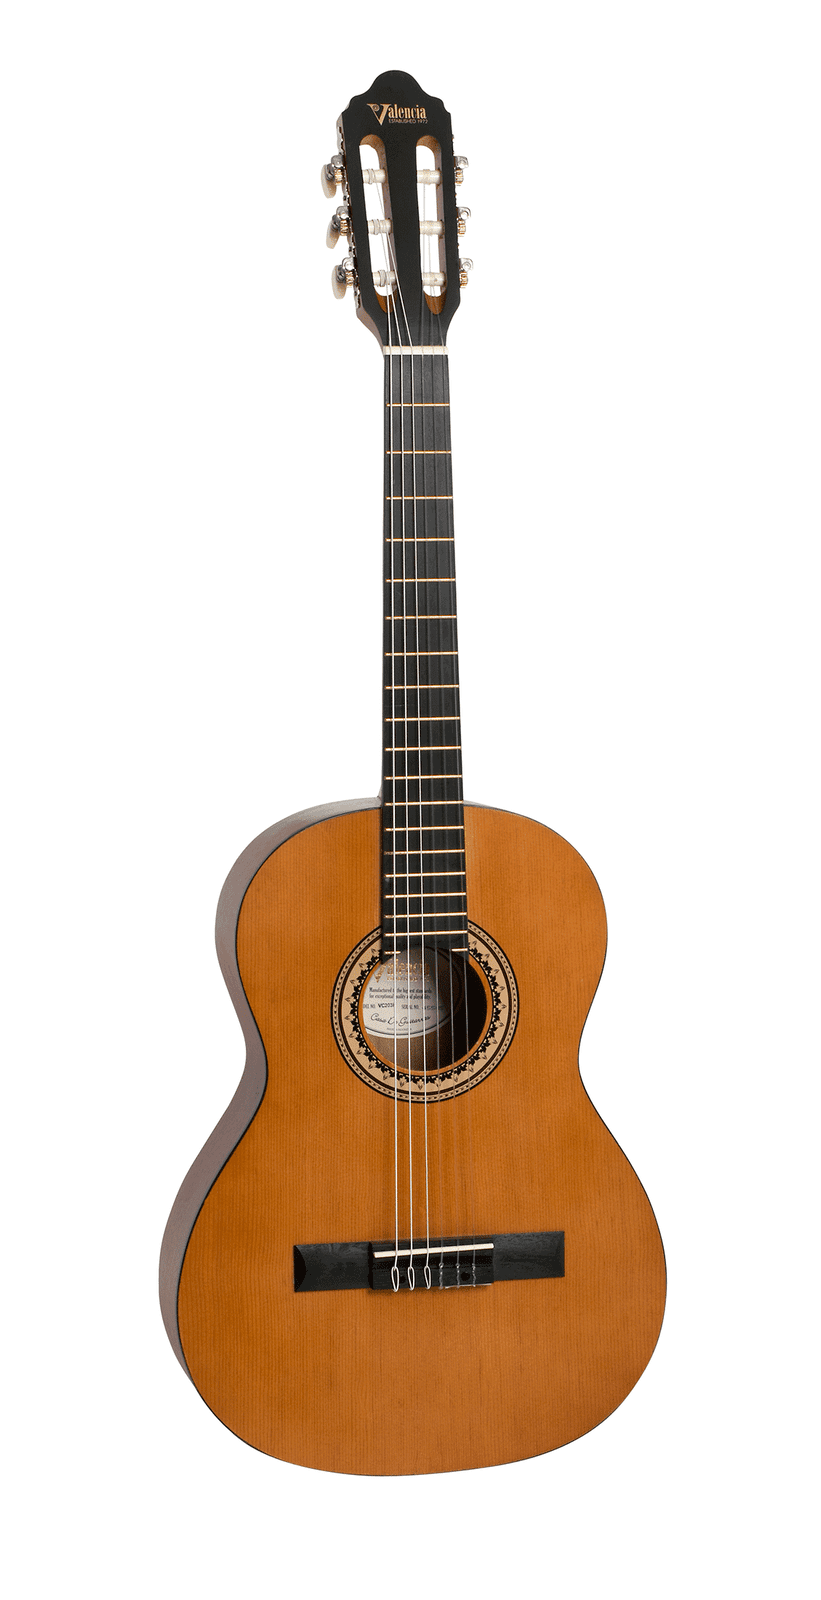 Valencia VC203H Series 200 Hybrid Thin Neck 3/4 Size Classical Guitar Antique Natural